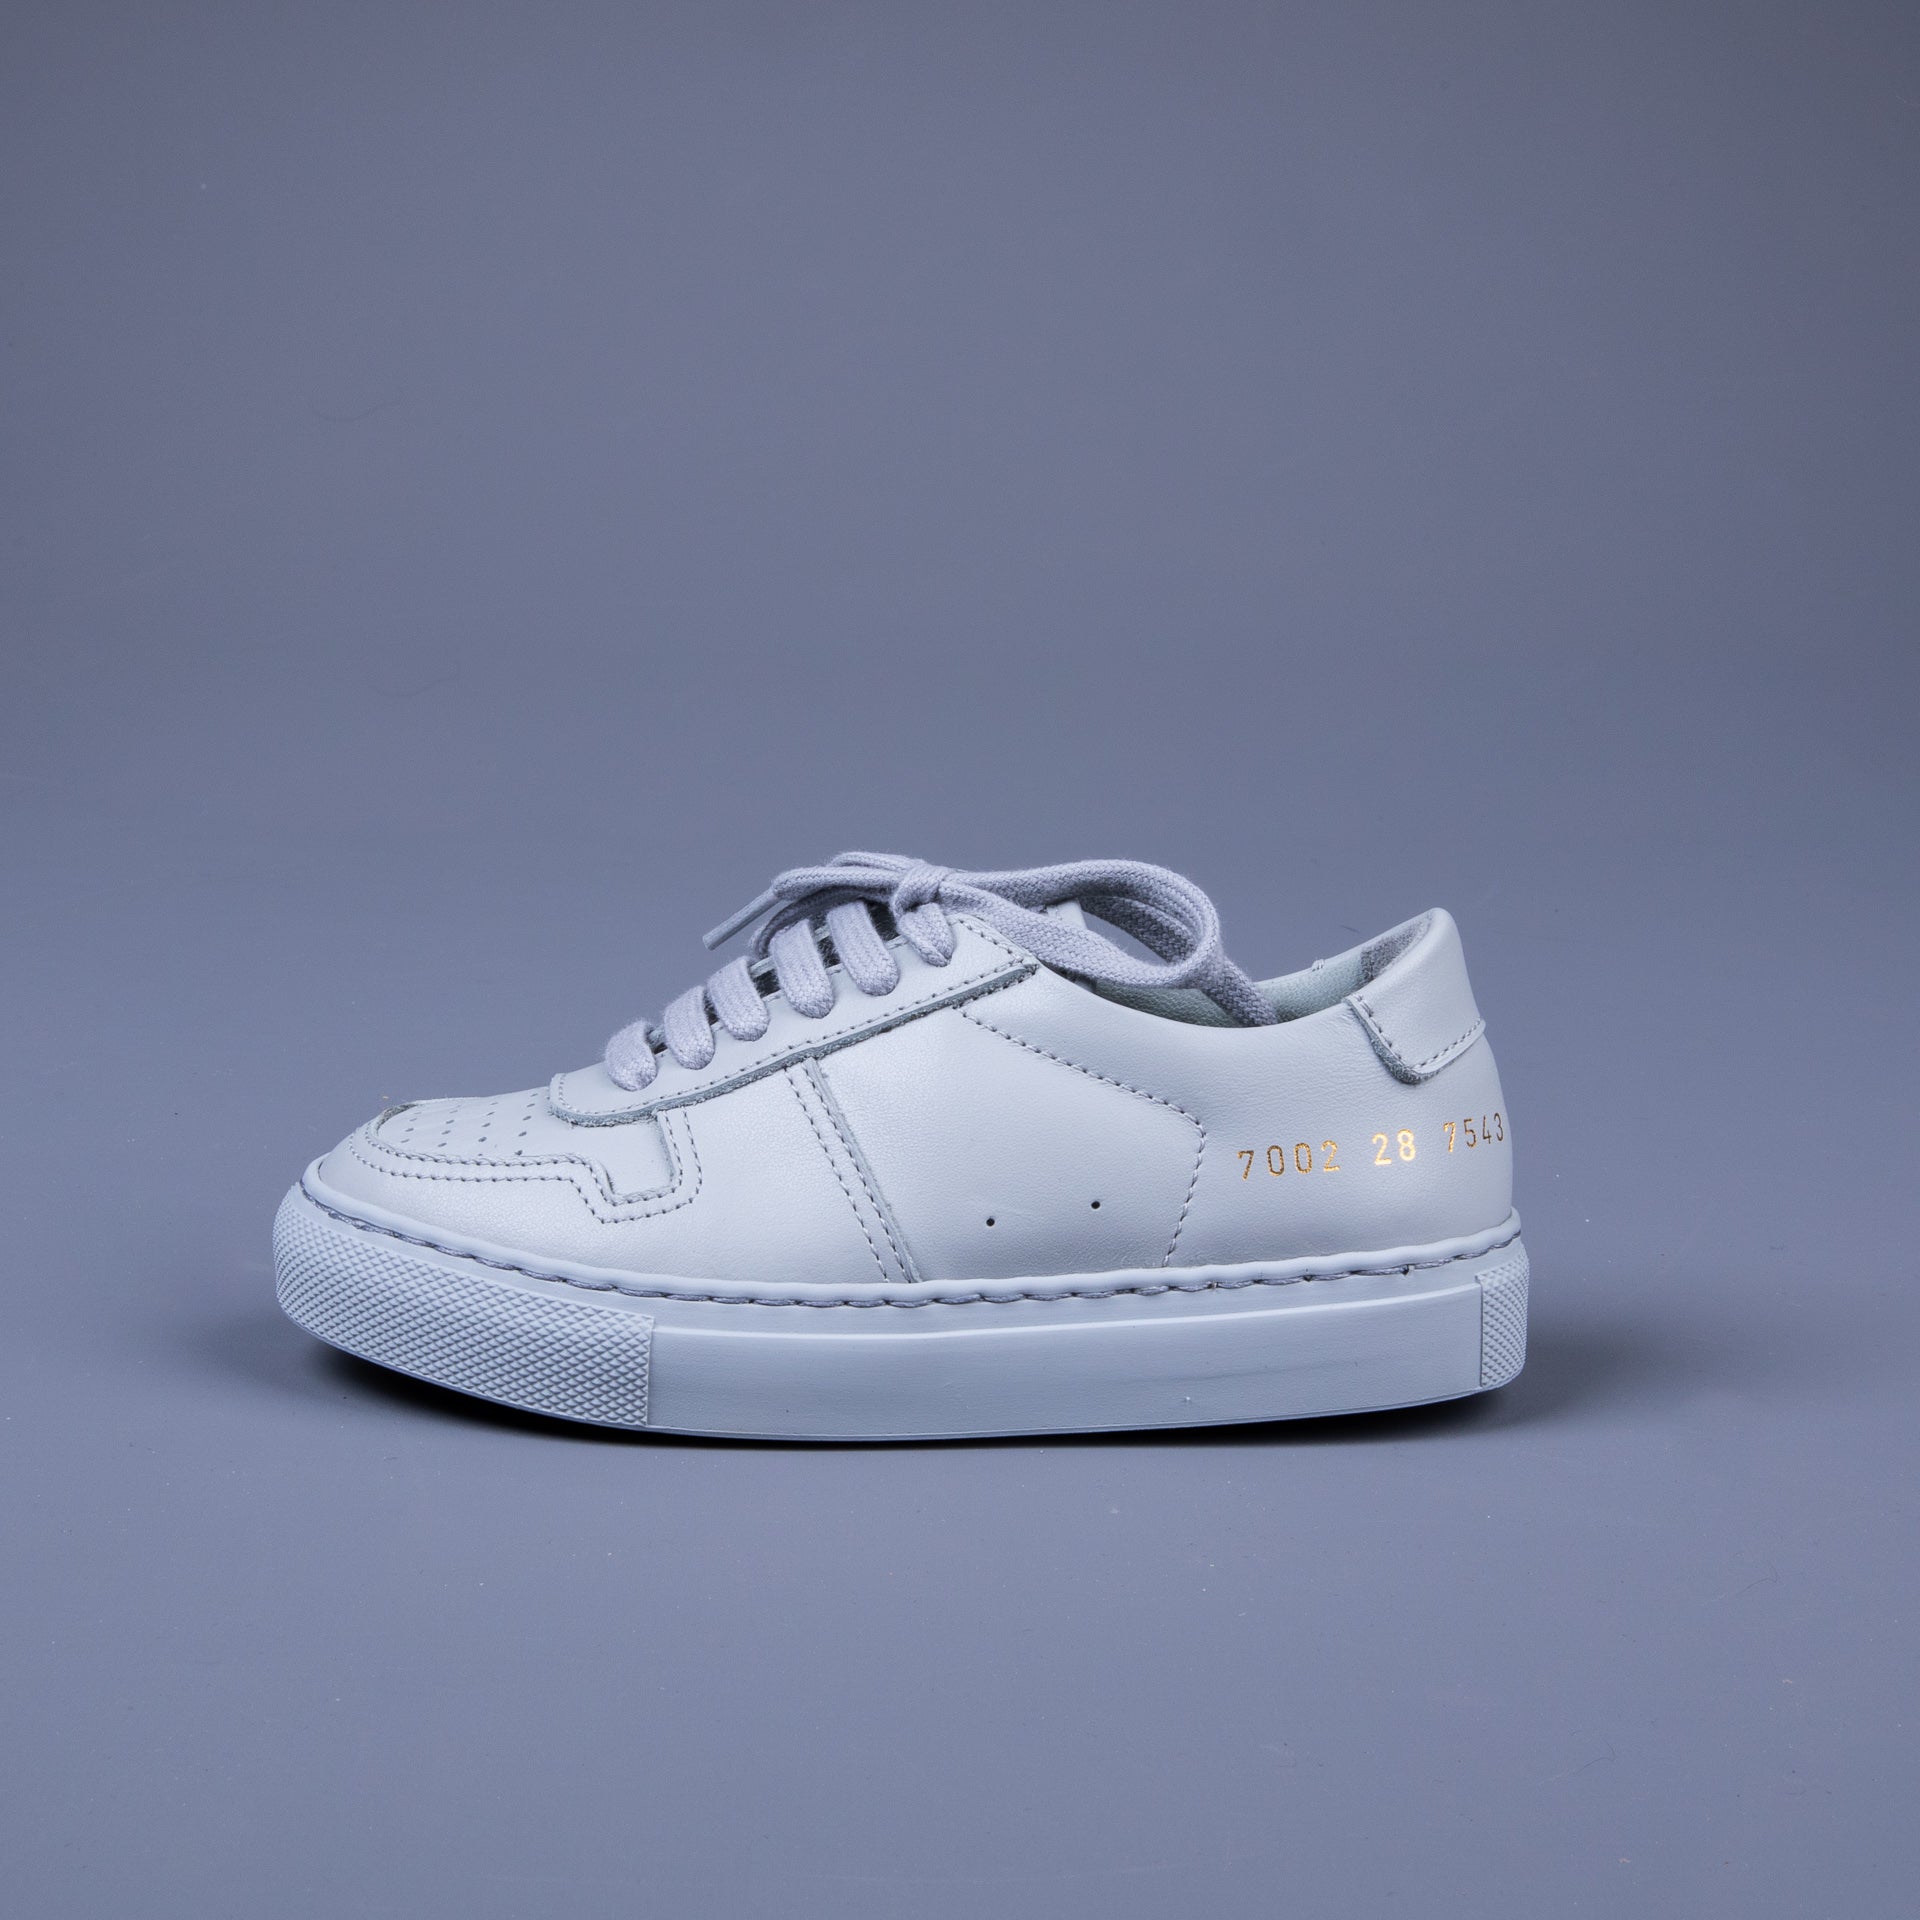 Common Projects Kids Bball Low in Leather Grey